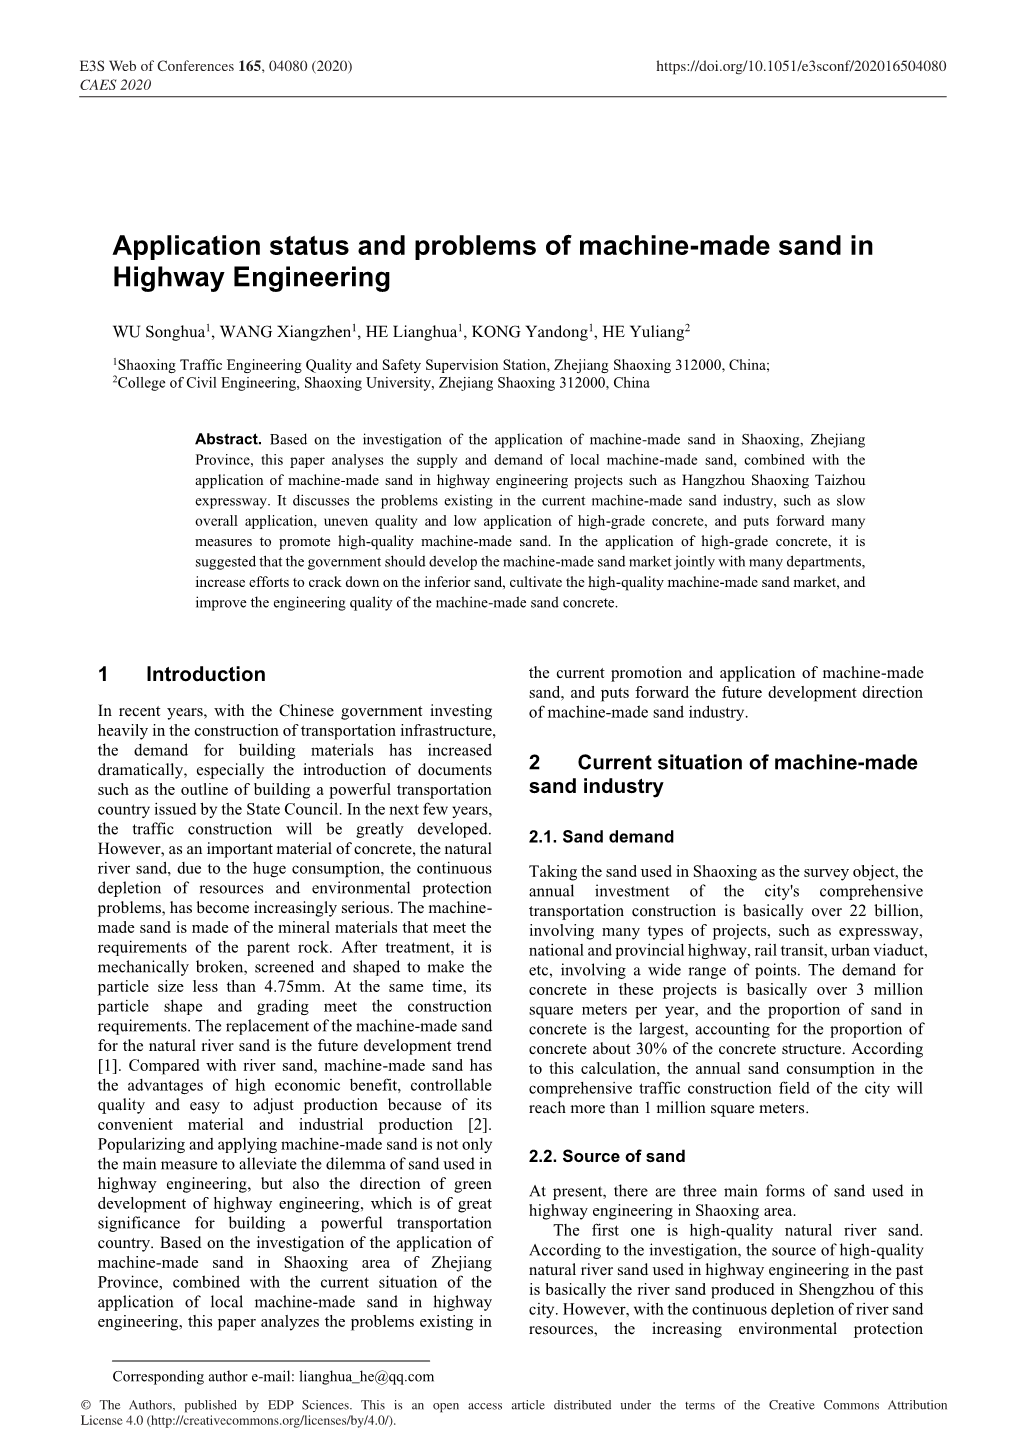 Application Status and Problems of Machine-Made Sand in Highway Engineering